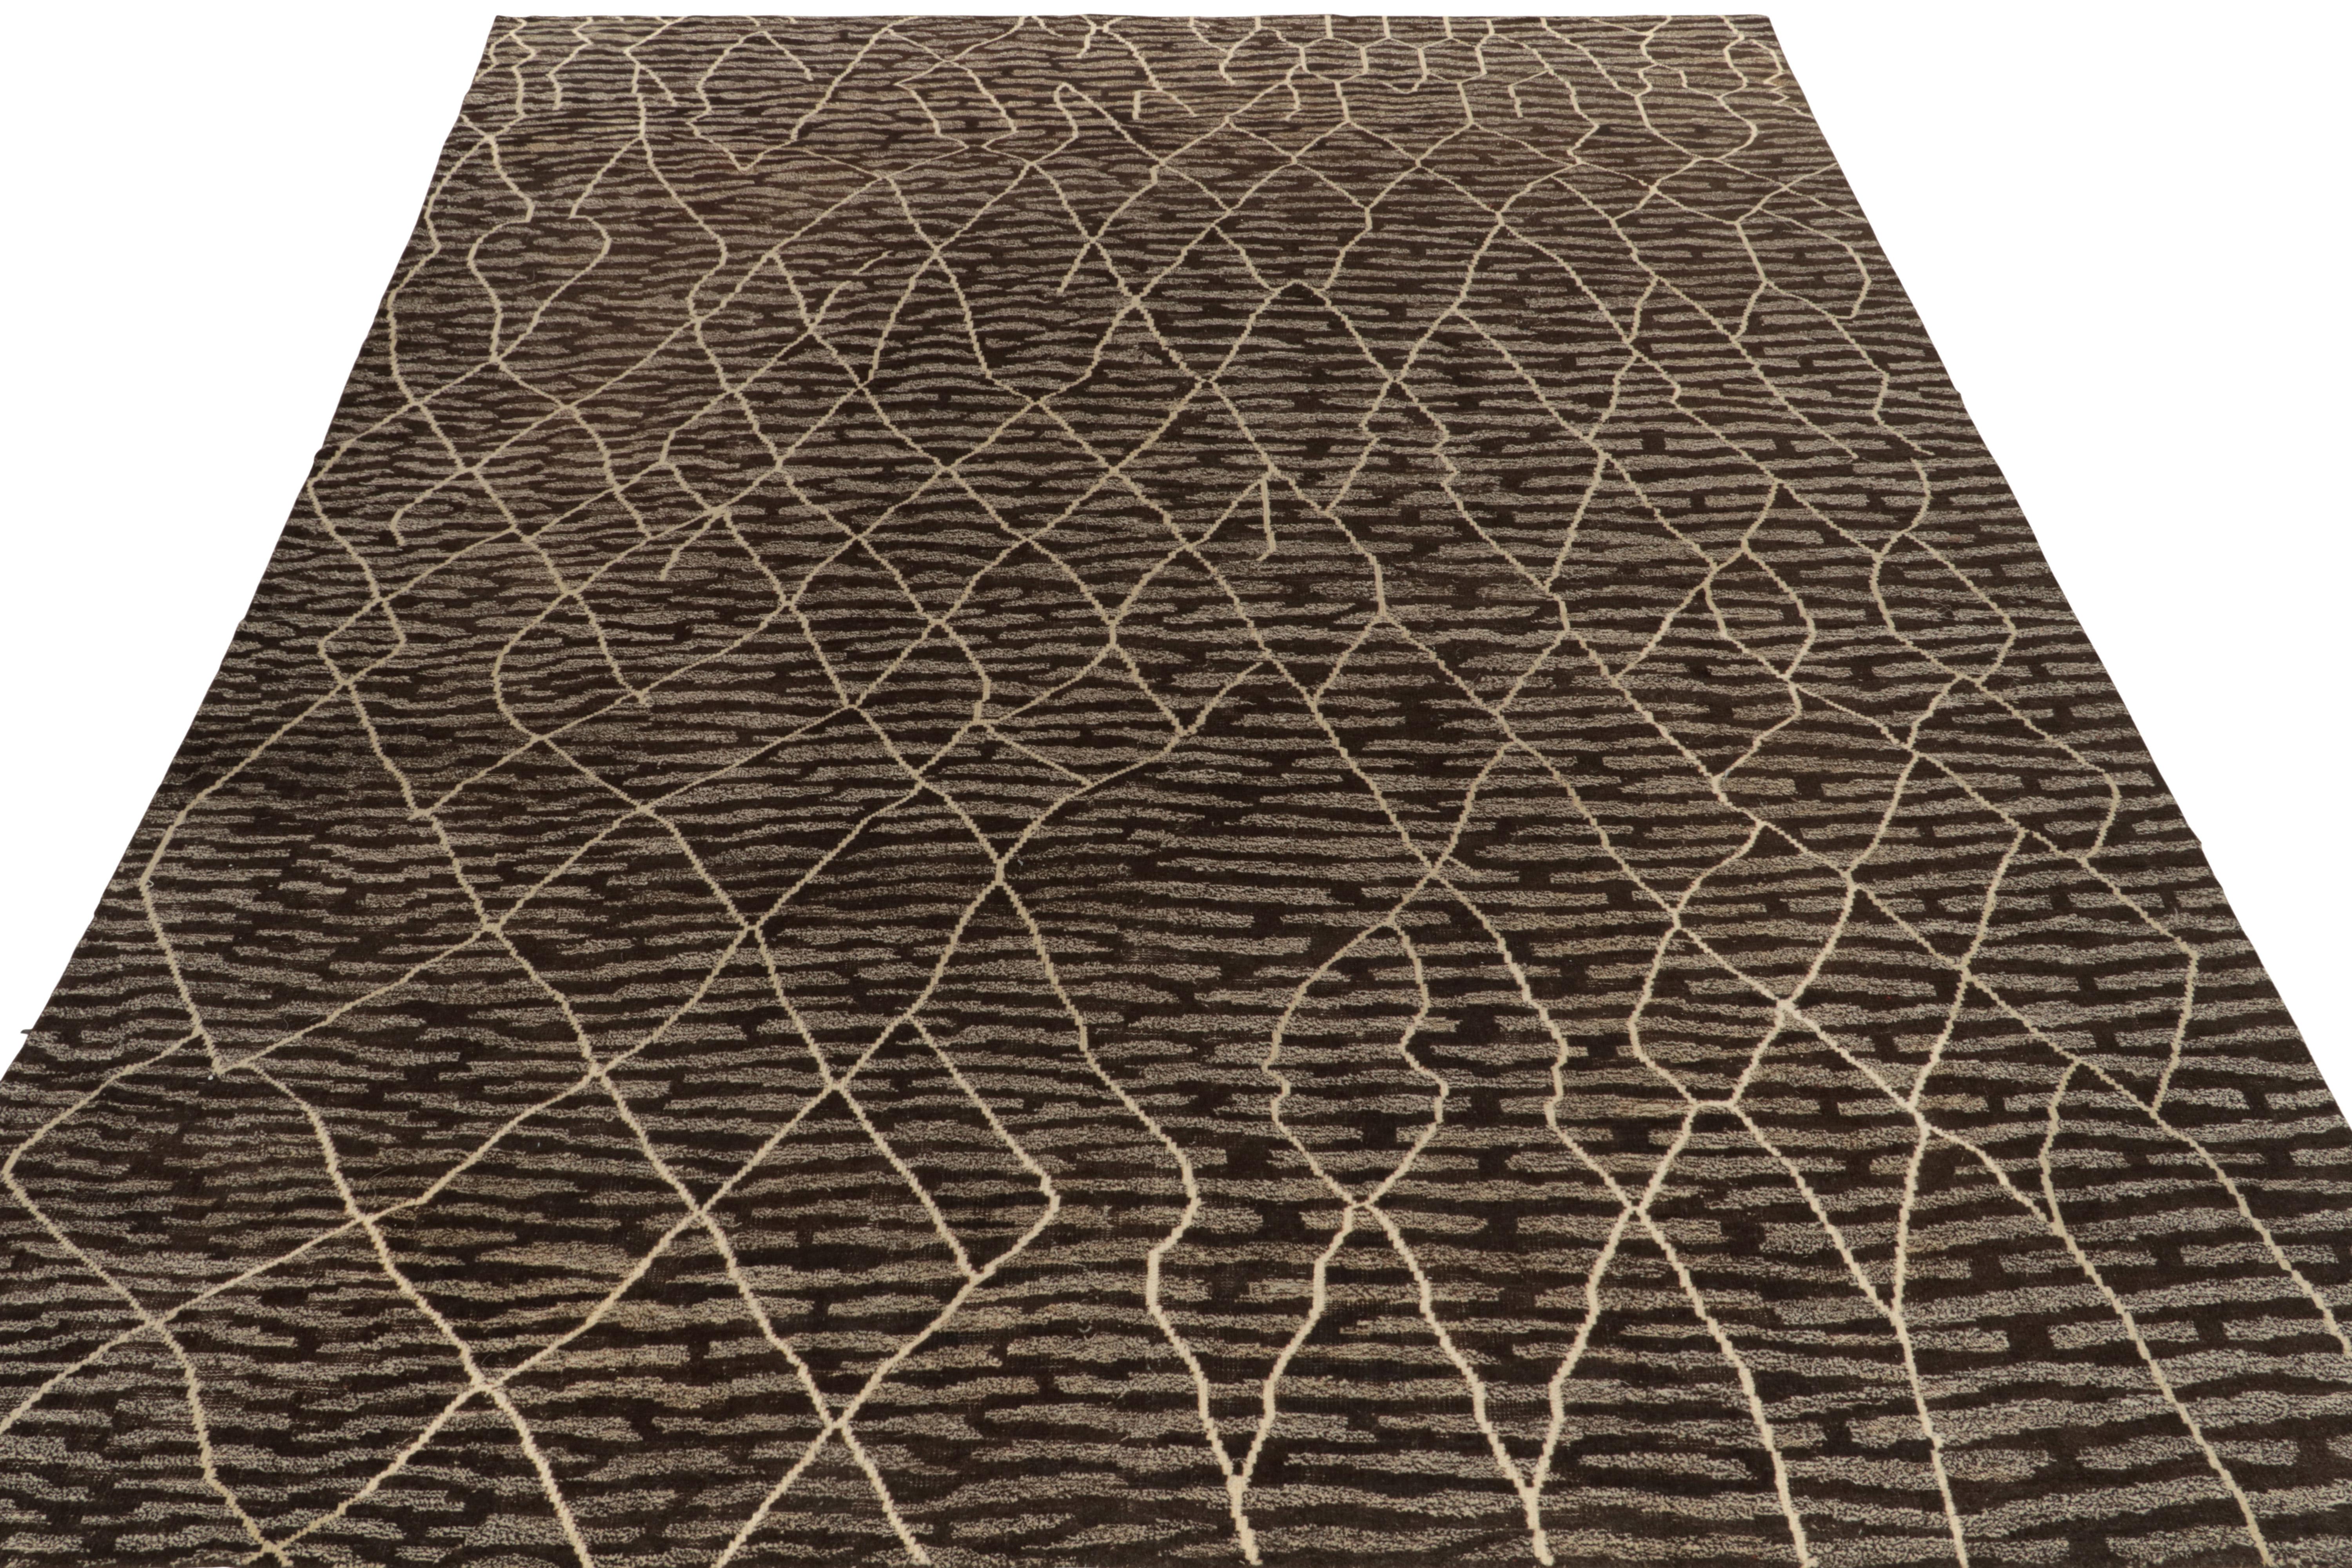 Rug & Kilim draws an intriguing modern tribute to Moroccan style with this 12x15 hand-knotted piece joining the titular collection. Relishing a subtle high-low tactility in wool, the rug carries a scintillating pattern in rich brown, black & off